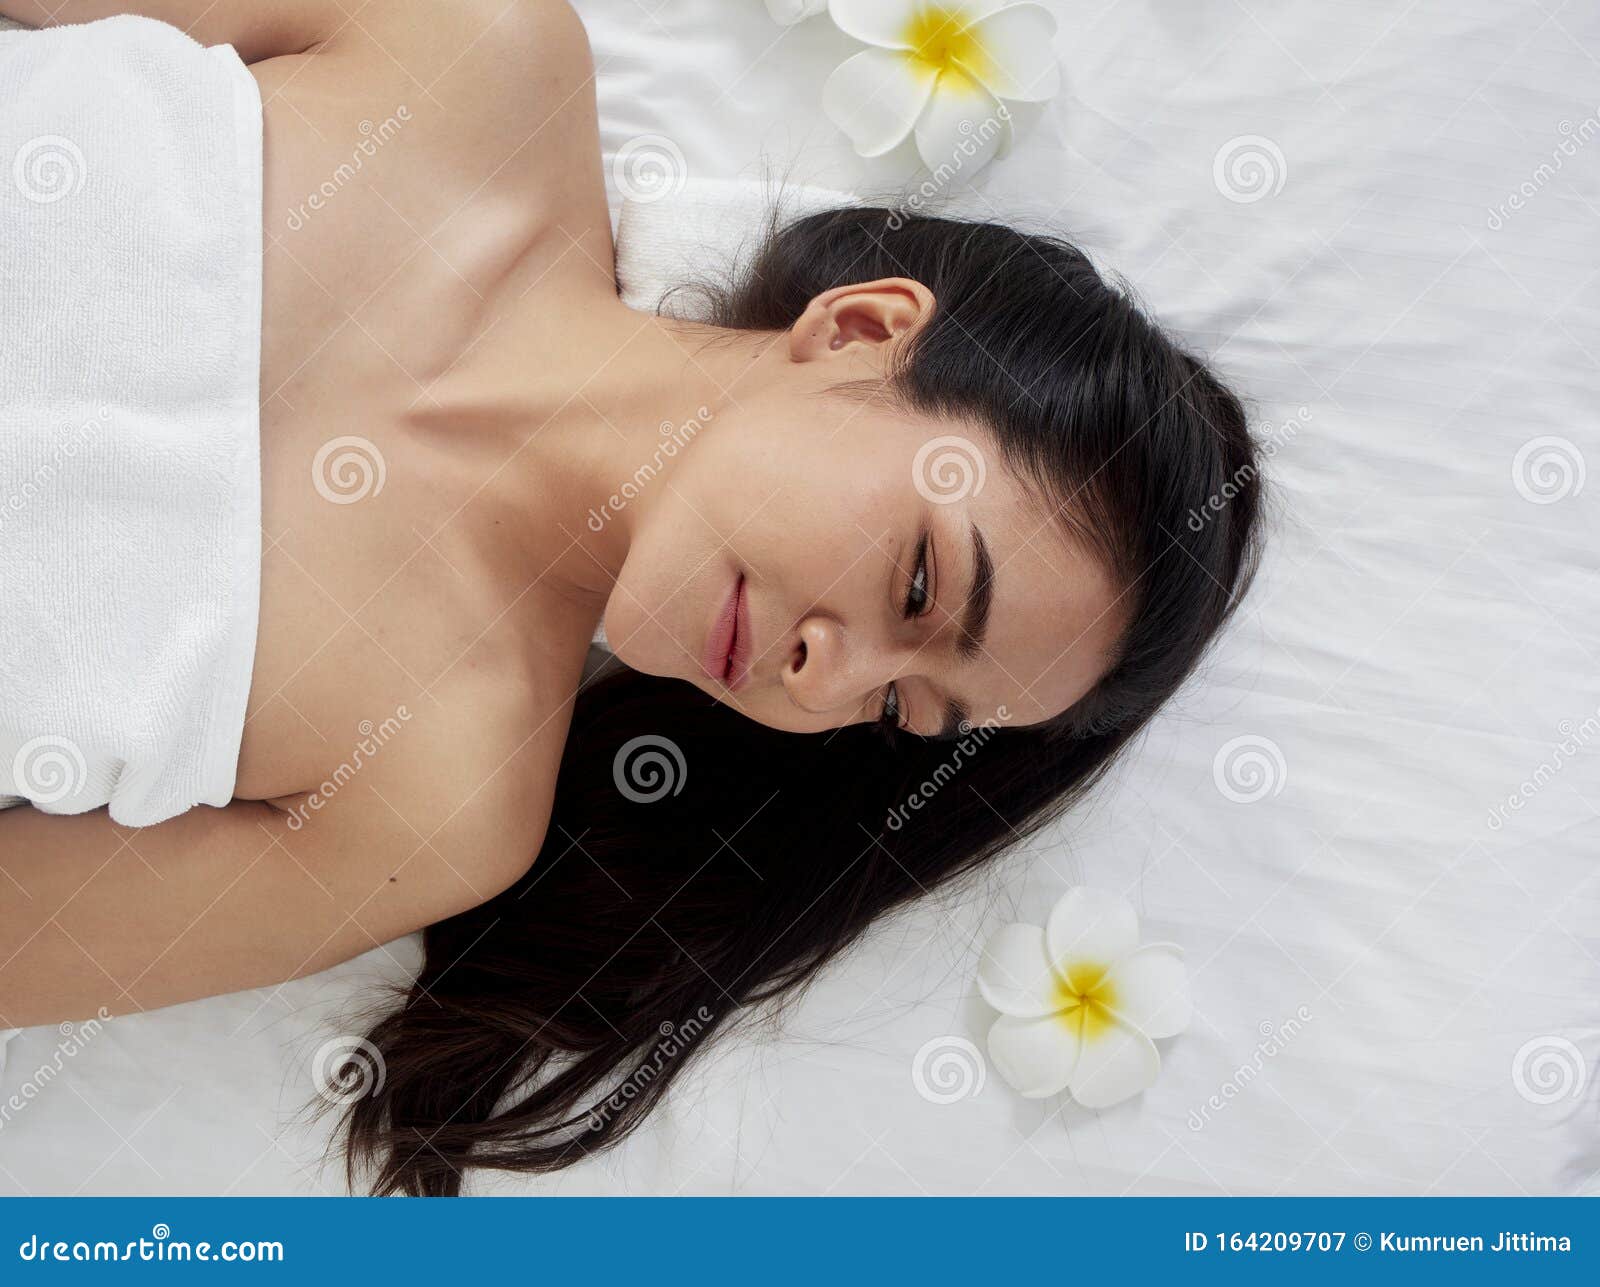 Beautiful Woman Receiving Facial Massage In Spa Stock Image Image Of